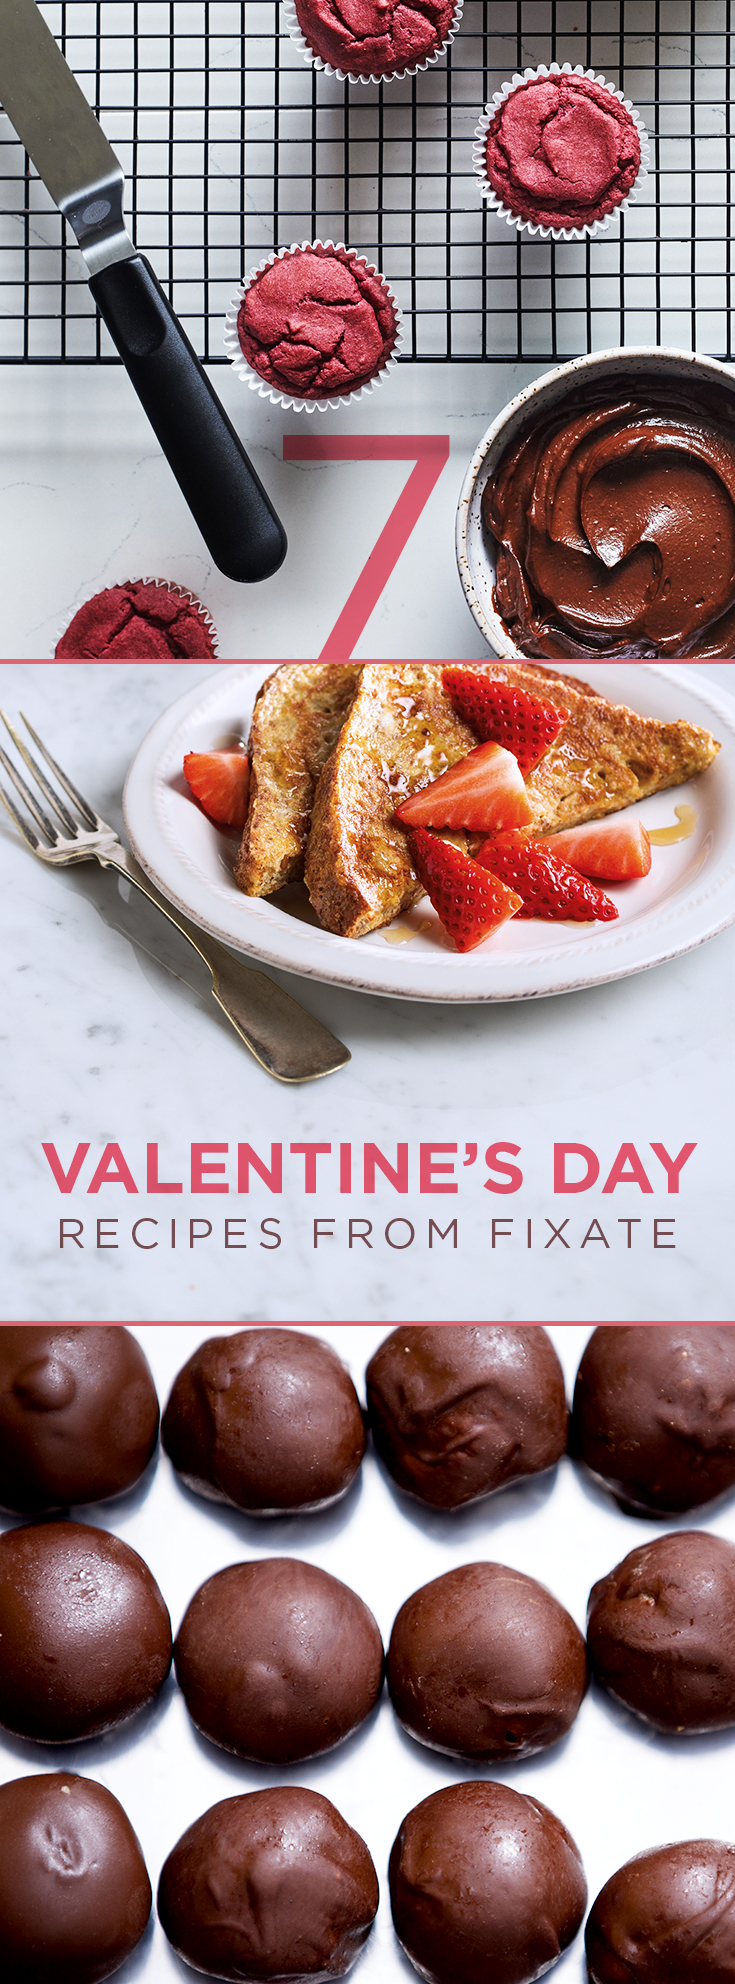 Healthy Valentine's Day Recipes from FIXATE cooking show with Autumn Calabrese.